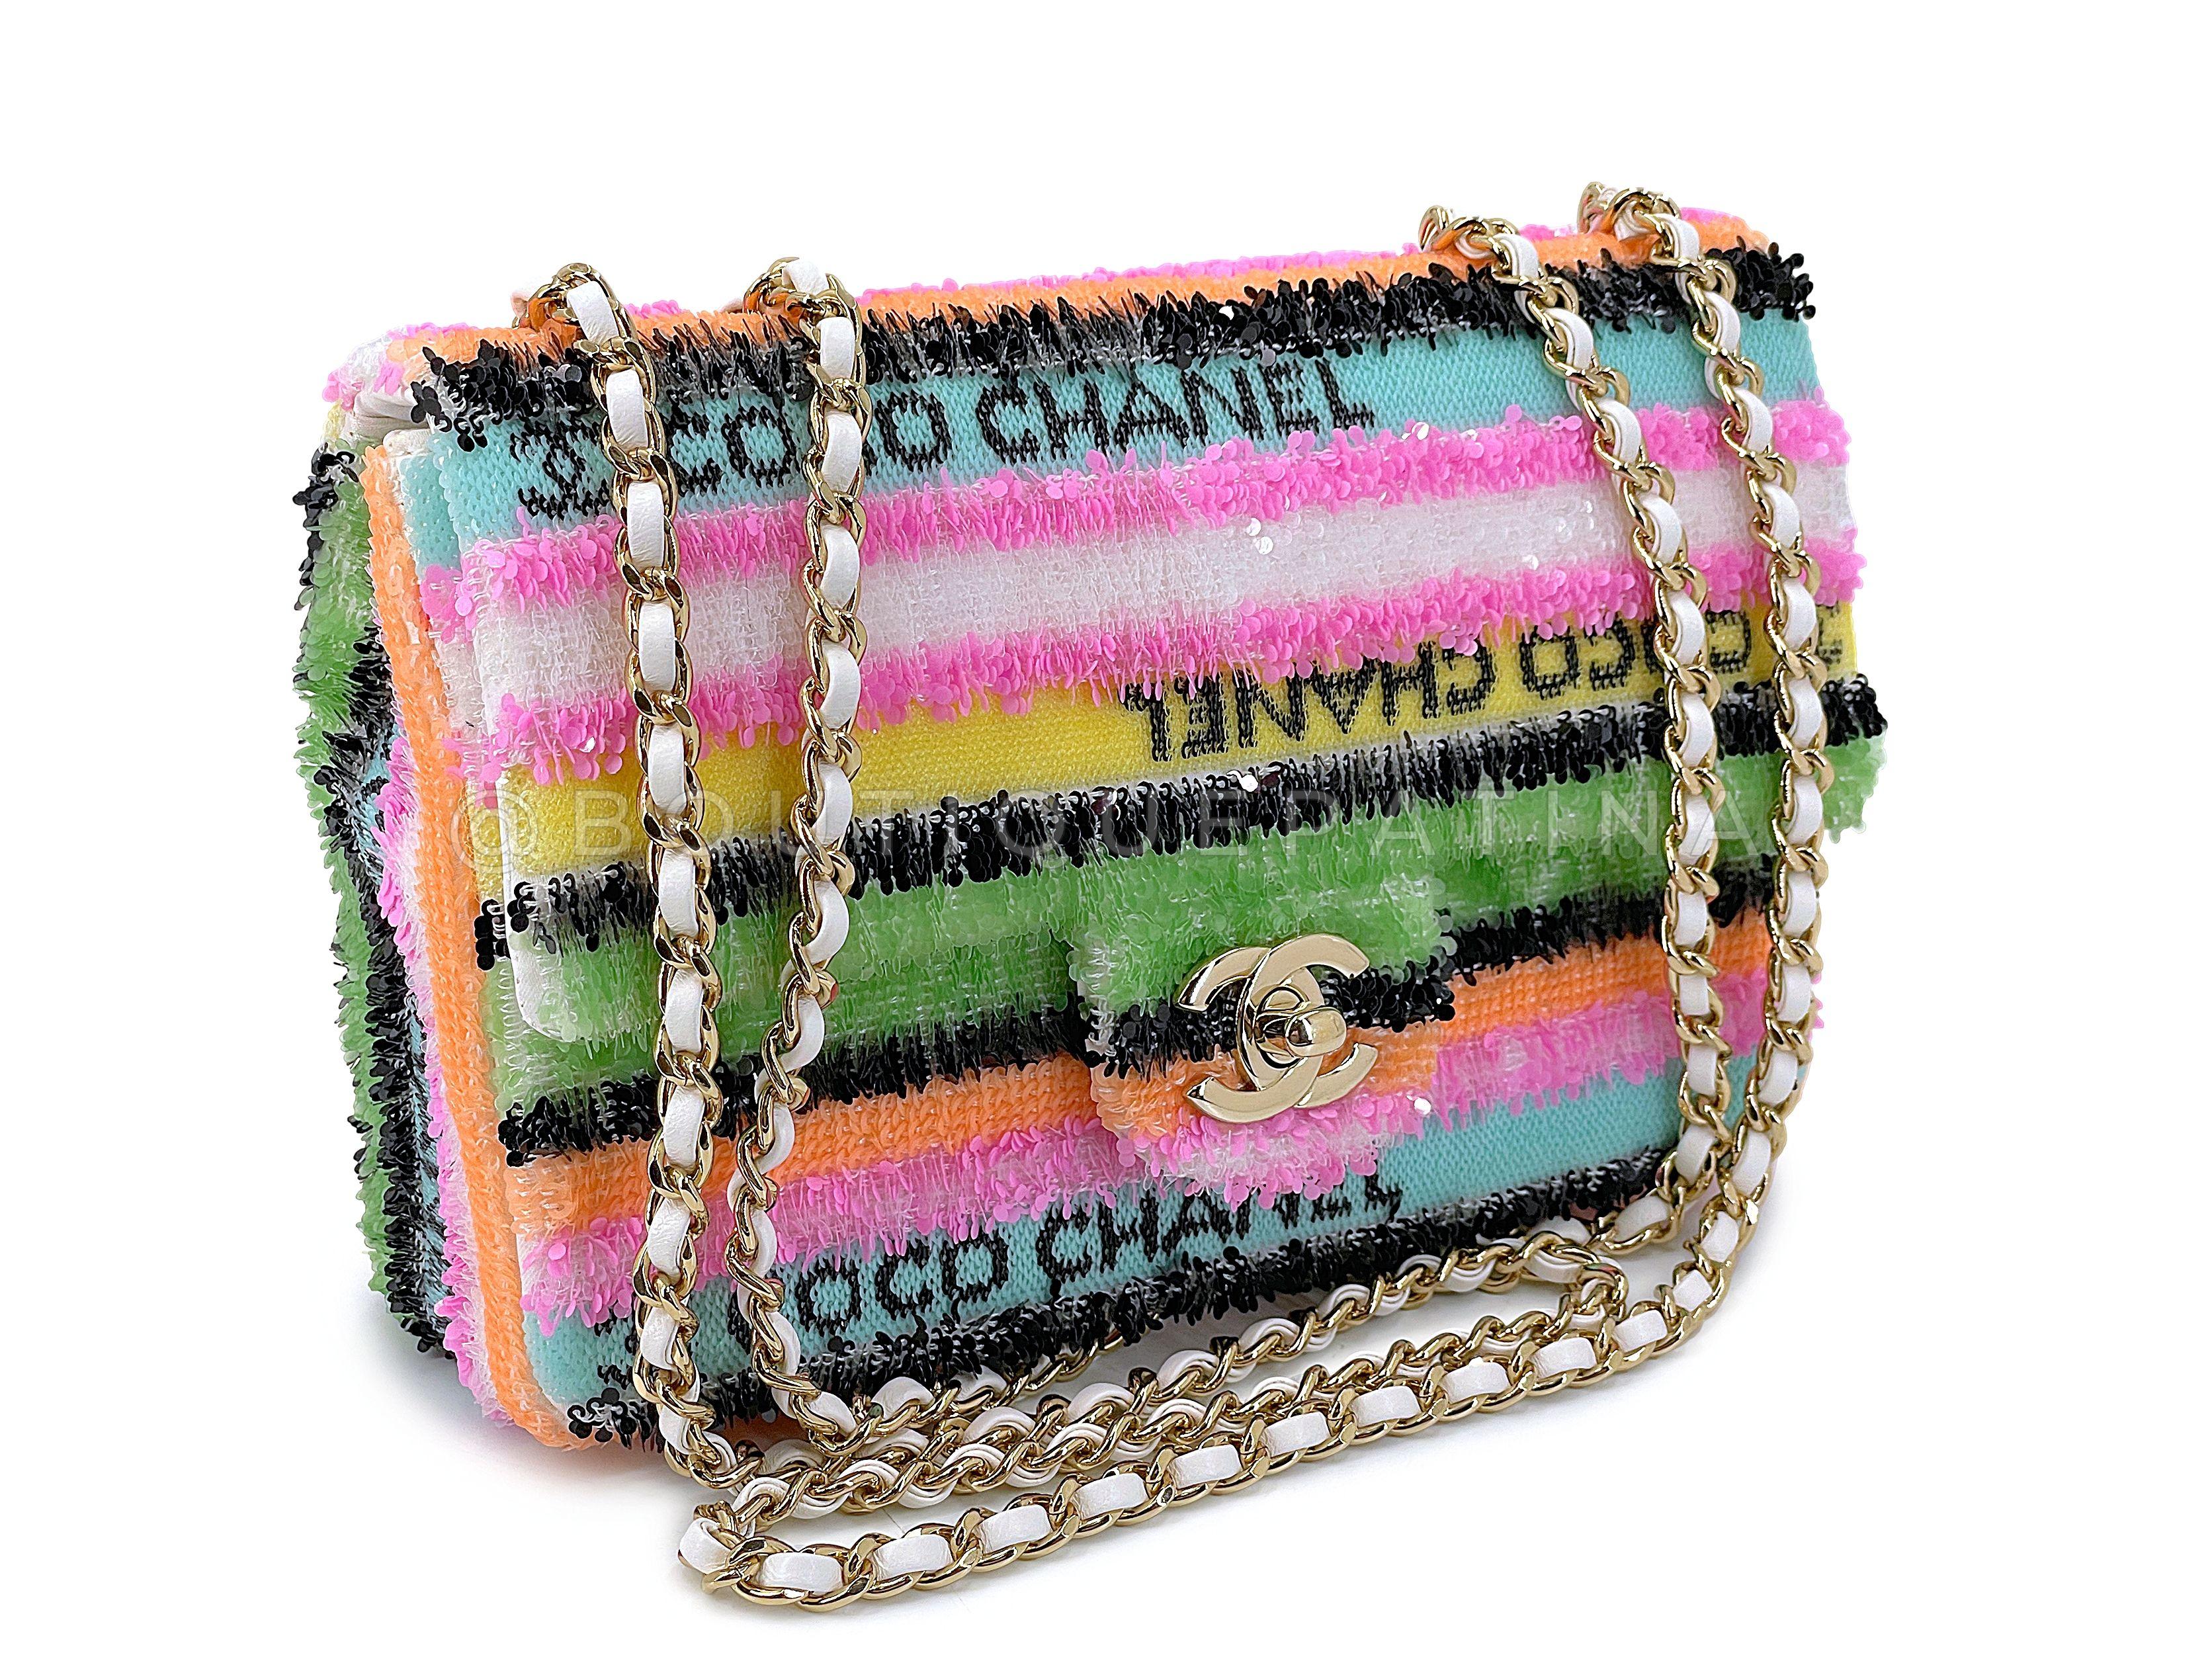 Store item: 67703
One of the most sought-after rectangular mini flaps from collectors recently has been this this Chanel Micro Rainbow Sequins Rectangular Mini Flap Bag GHW. 

For 20 years, Boutique Patina has specialized in sourcing and curating